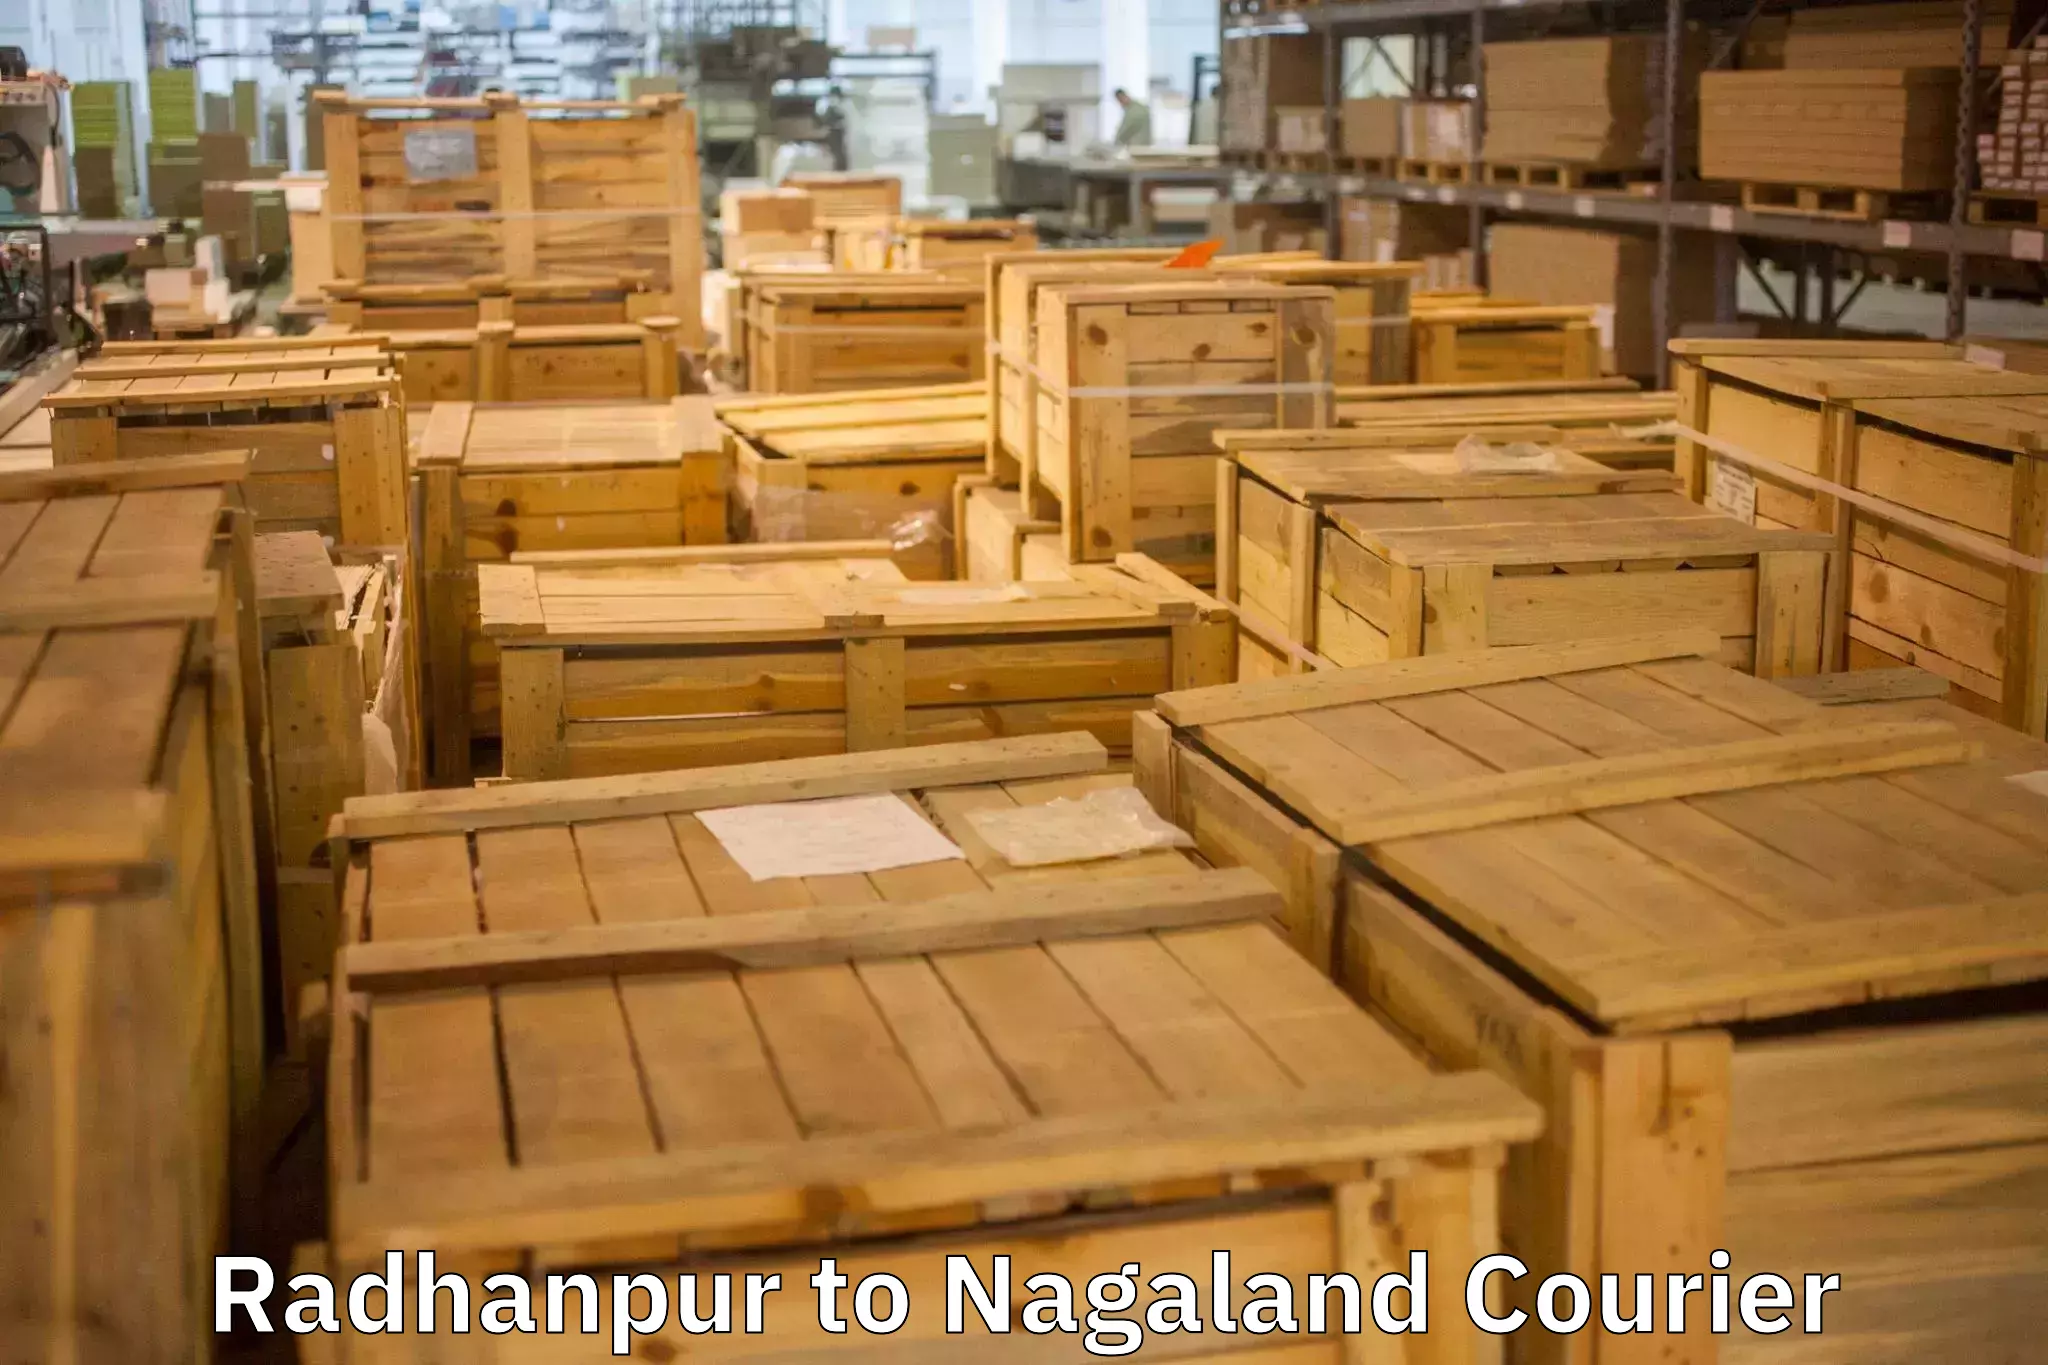 Moving and storage services Radhanpur to Nagaland